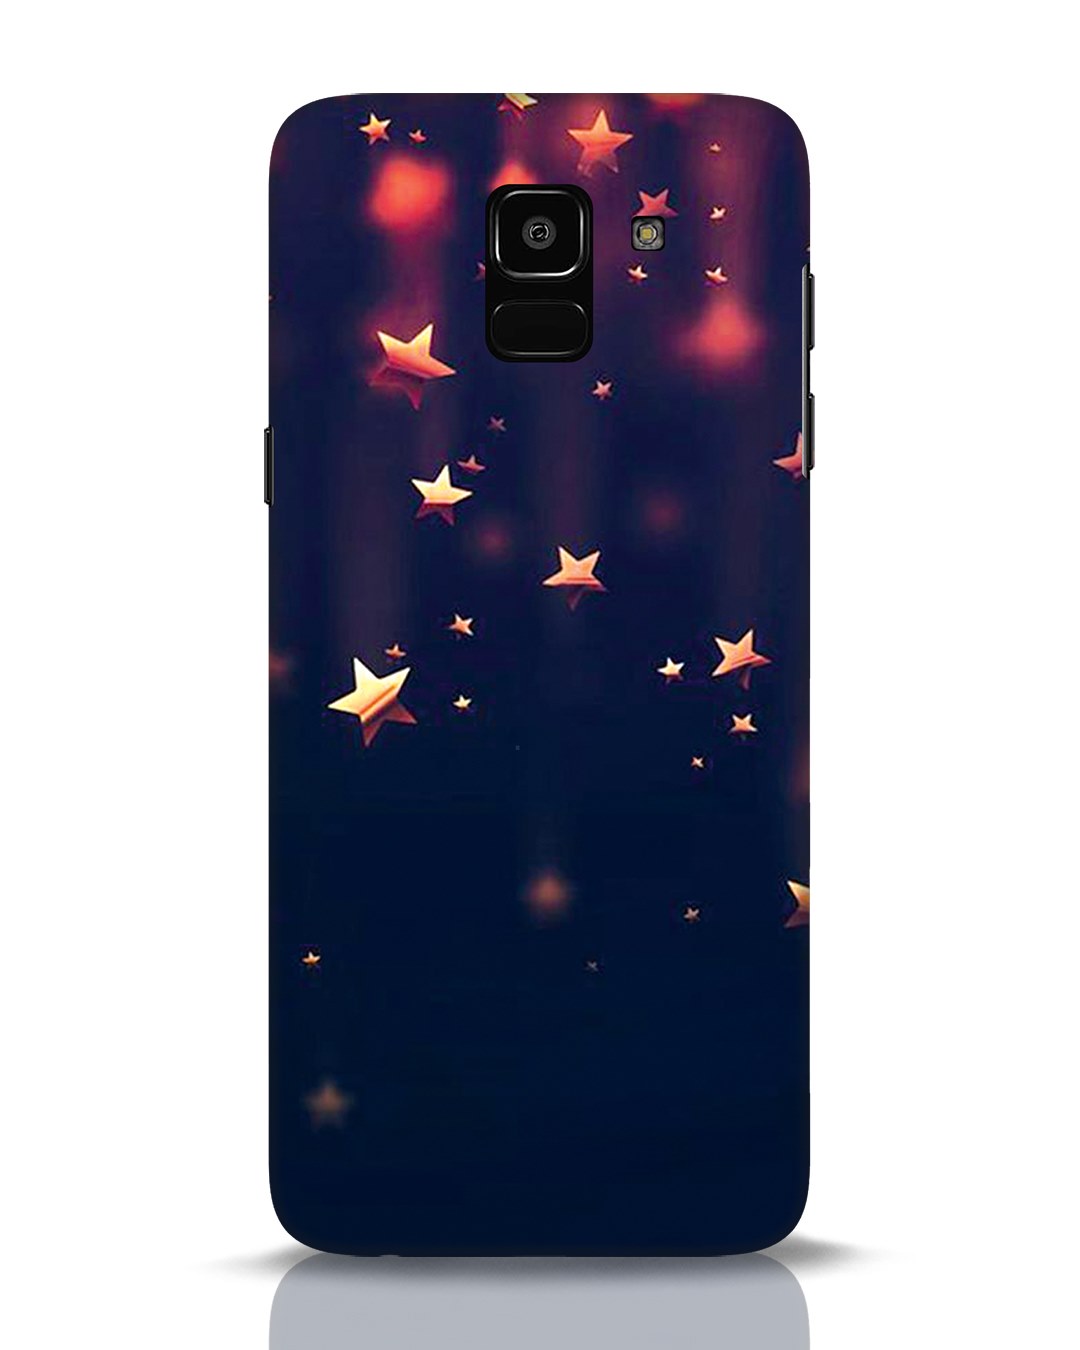 Buy Starry Samsung Galaxy J6 Mobile Cover For Unisex Online At Bewakoof 1826